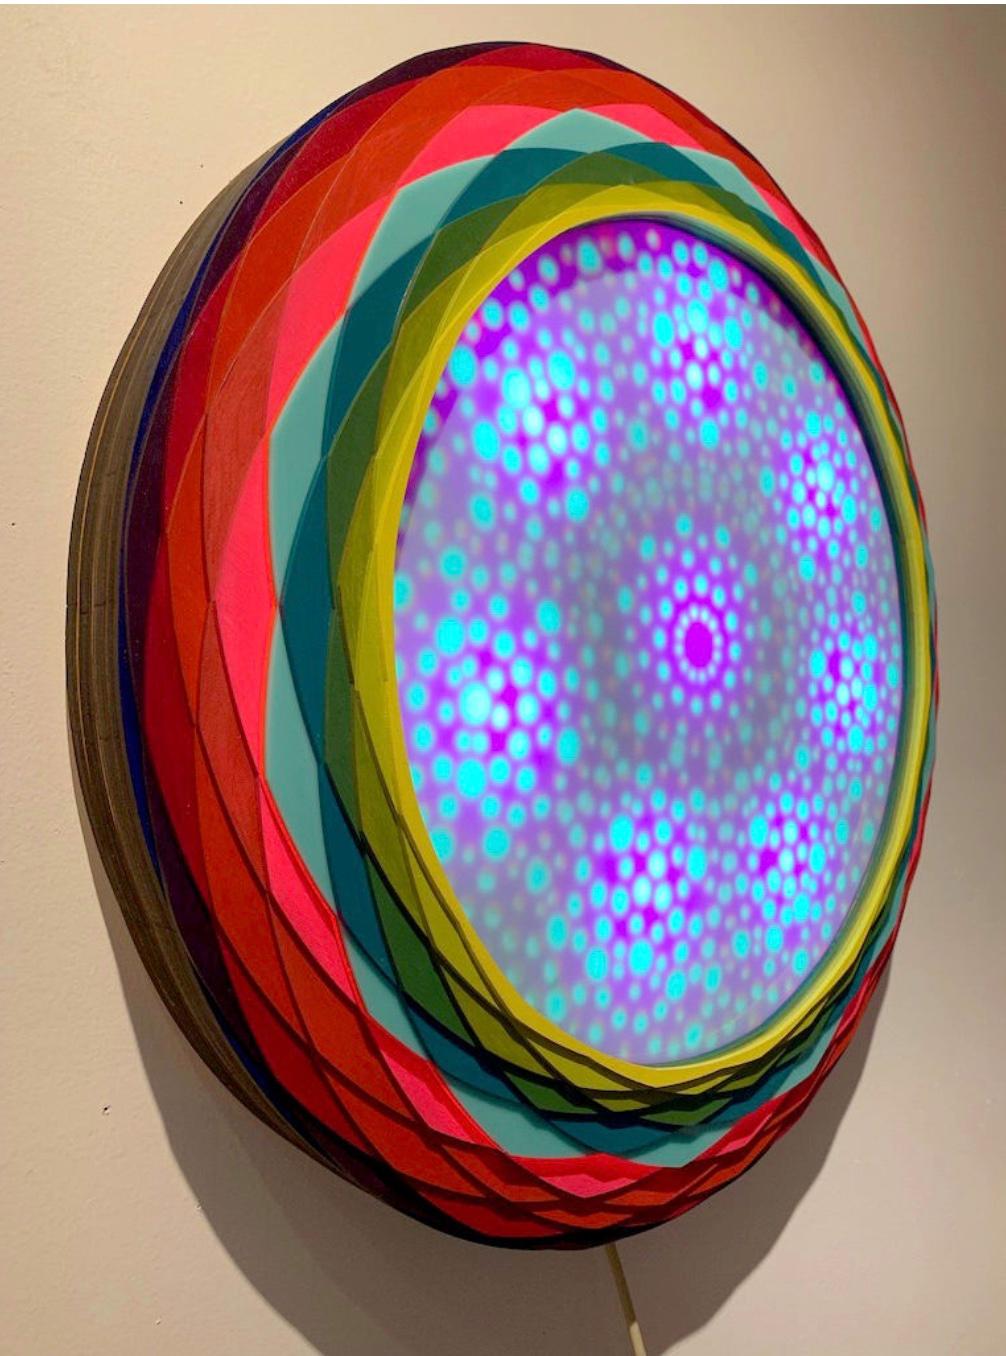 Acrylic on Lasercut wood, LEDs, Ardino, motion censor 30 x 30 x 4 in (76.2 x 76.2 x 10.16 cm)

Christine Romanell was born in Paterson, NJ. Her work focuses on aperiodic patterns as they relate to the underlying structures of reality. She sets up